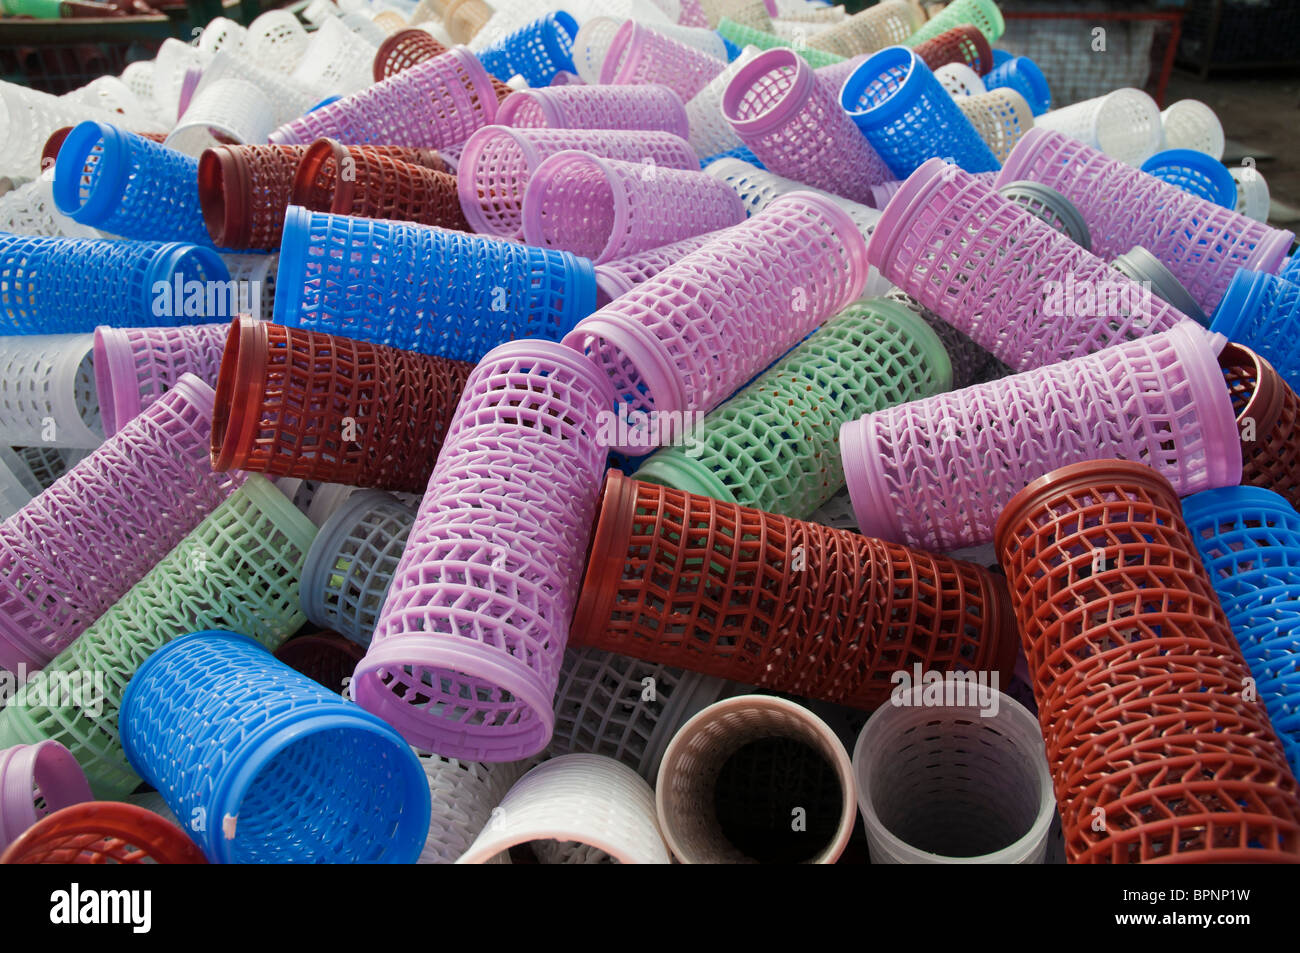 Plastic hair curlers stockpiled for recycling at a recycling plant Stock Photo